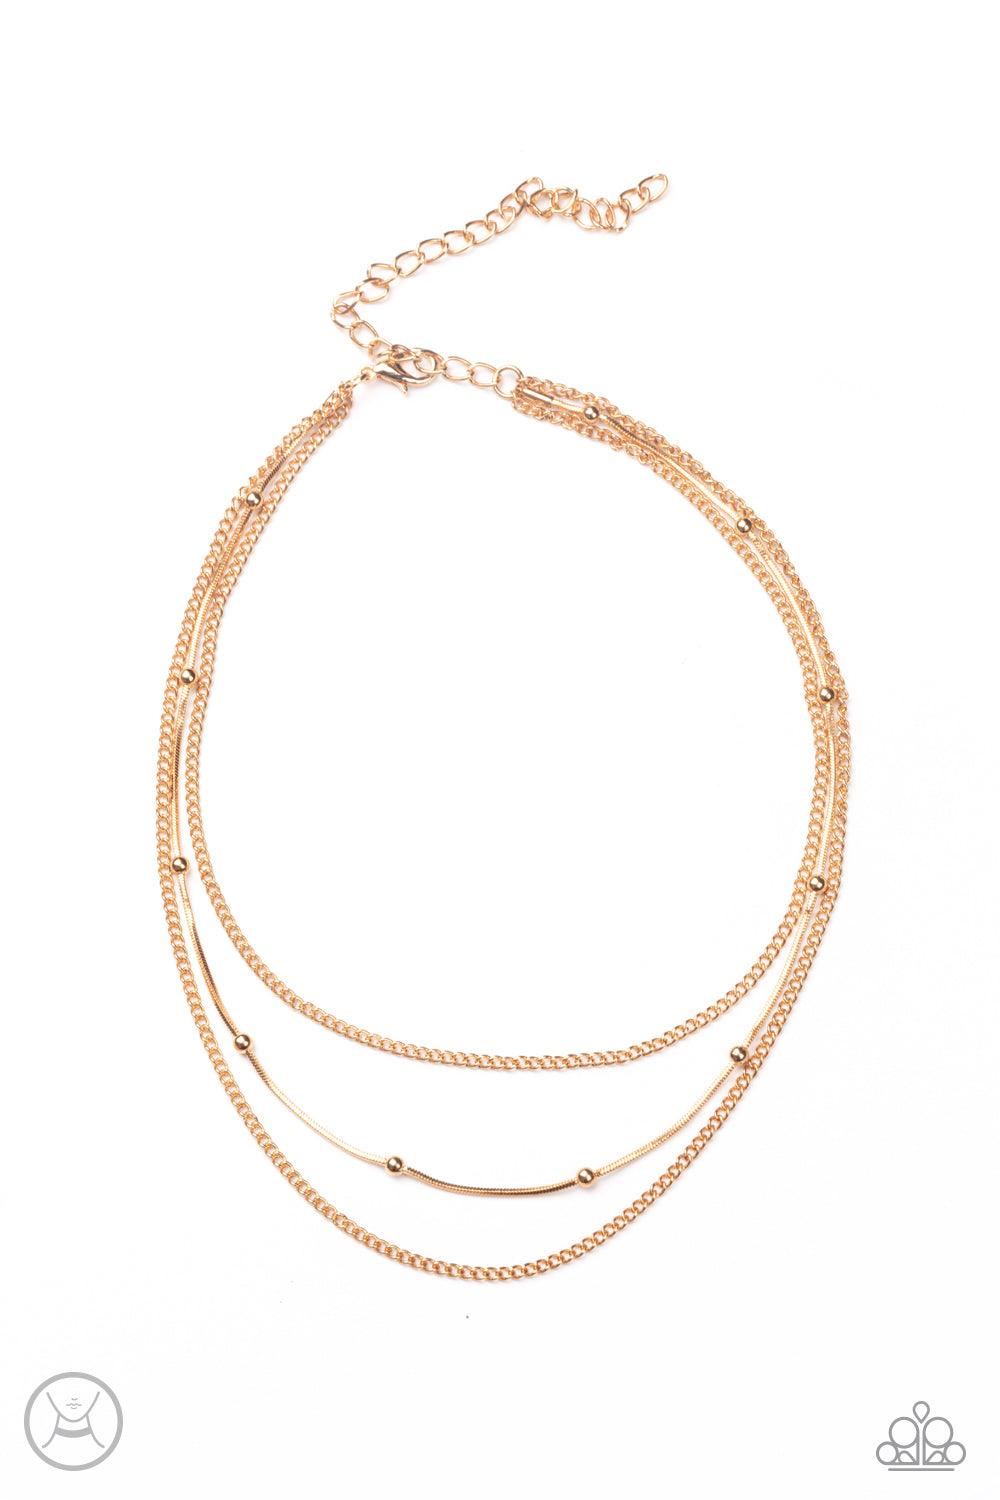 Paparazzi Accessories Subtly Stunning - Gold Infused with two dainty gold chains, a gold beaded snake chain wraps around the neck for a stunning layered look. Features an adjustable clasp closure. Sold as one individual choker necklace. Includes one pair